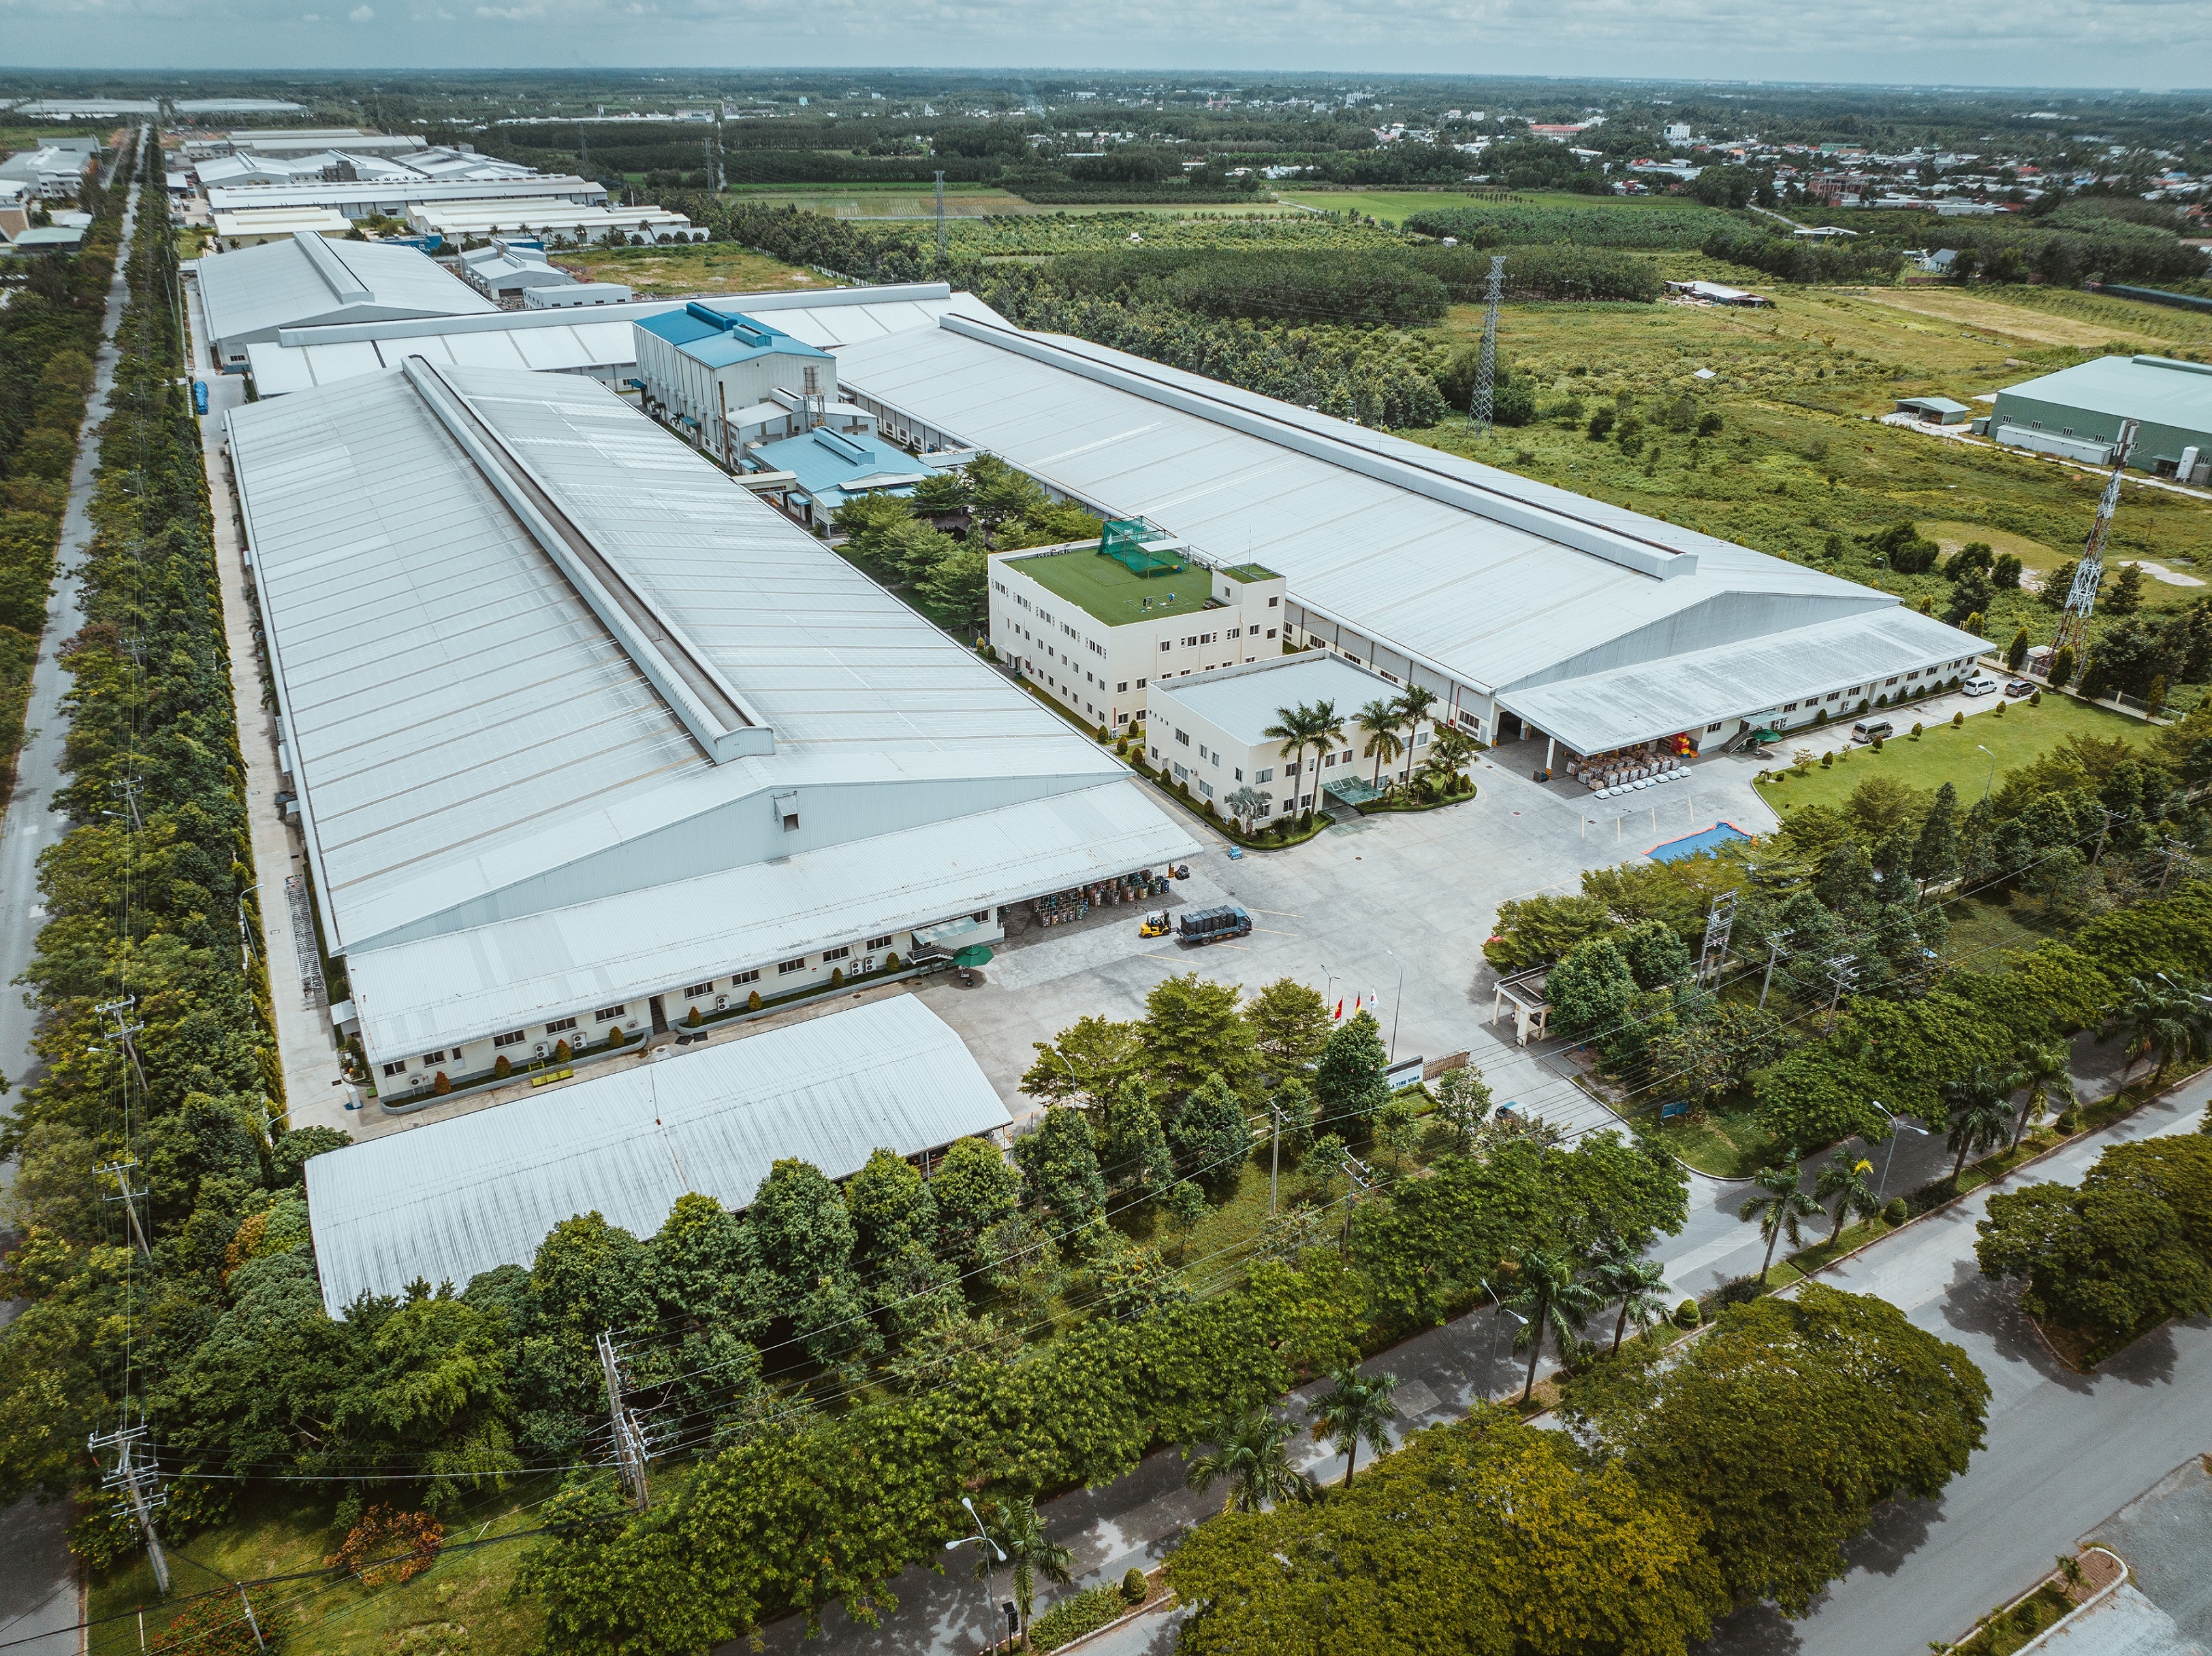 Schwalbe, citing a 'tense situation' in industry, consolidates production in Vietnam